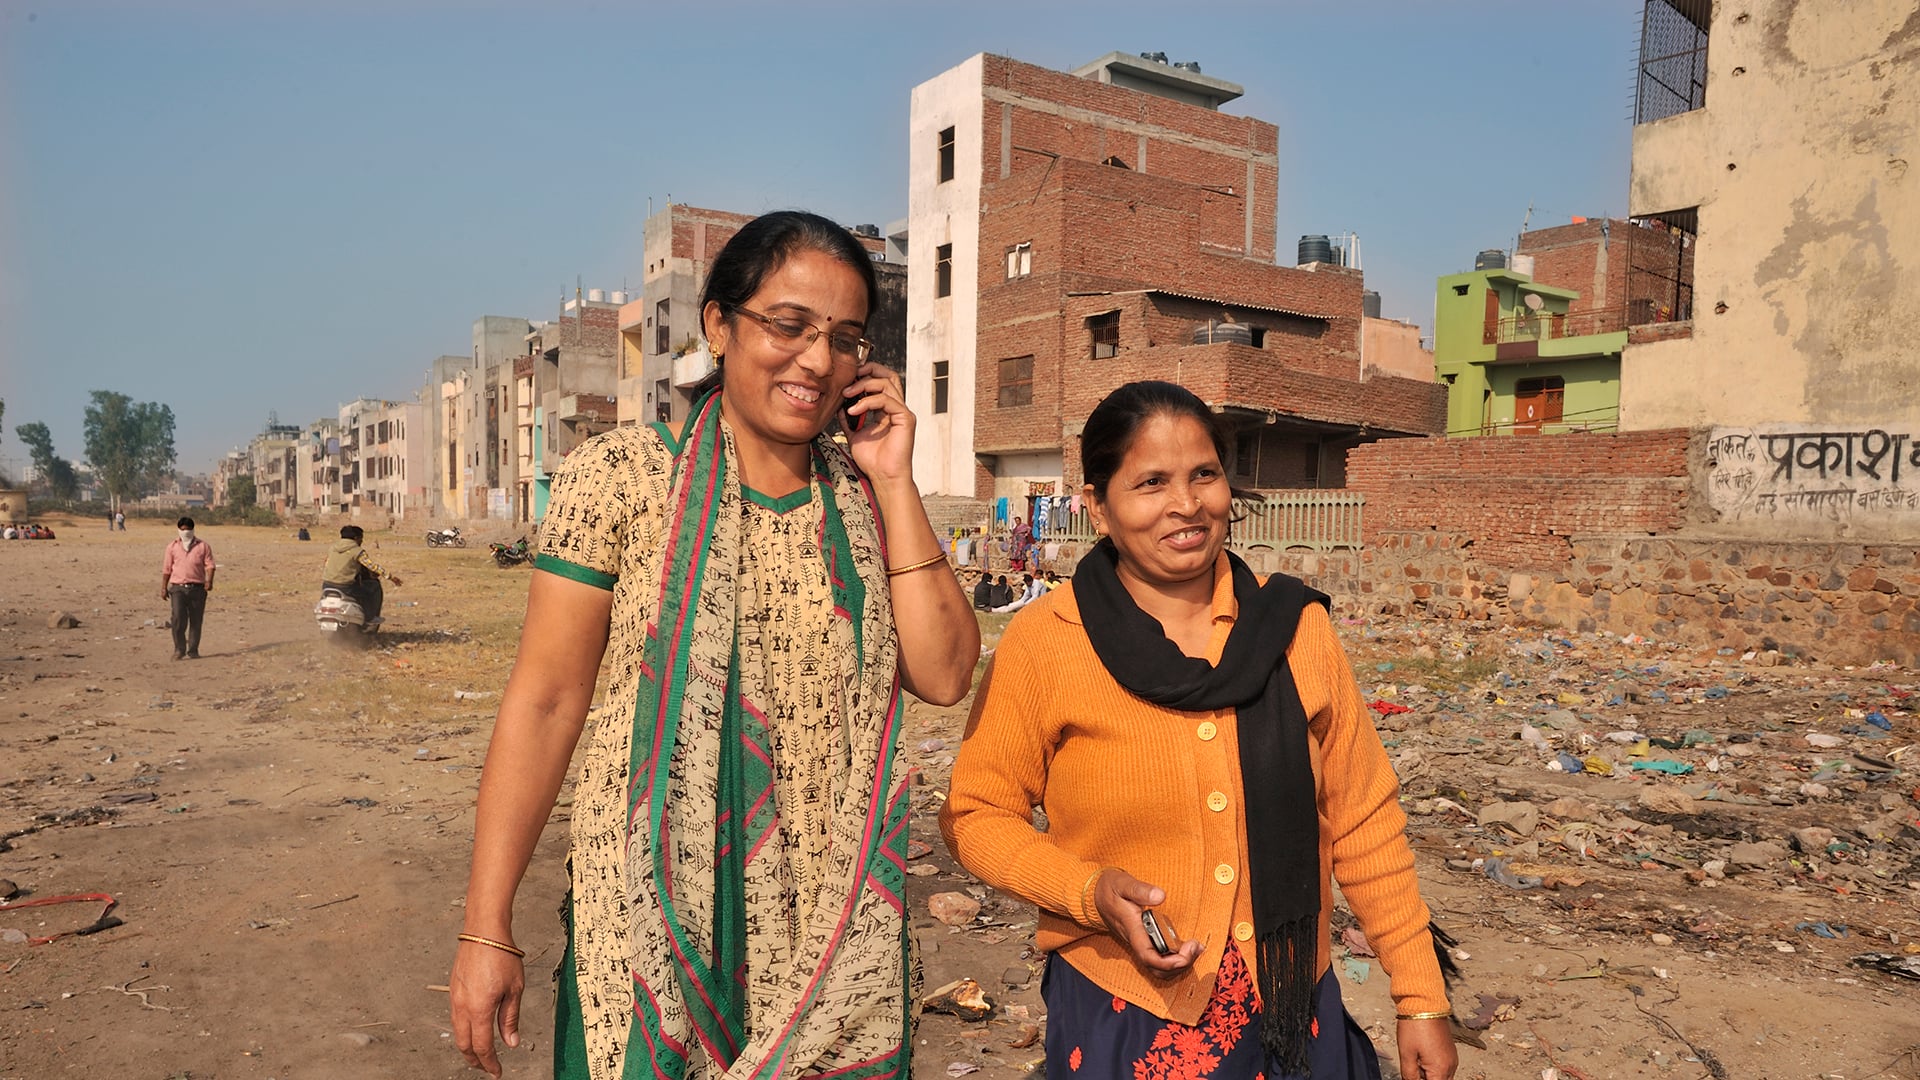 Sowing seeds of peace with the women of Delhi - Rochester Diocese’s Poverty and Hope Appeal.